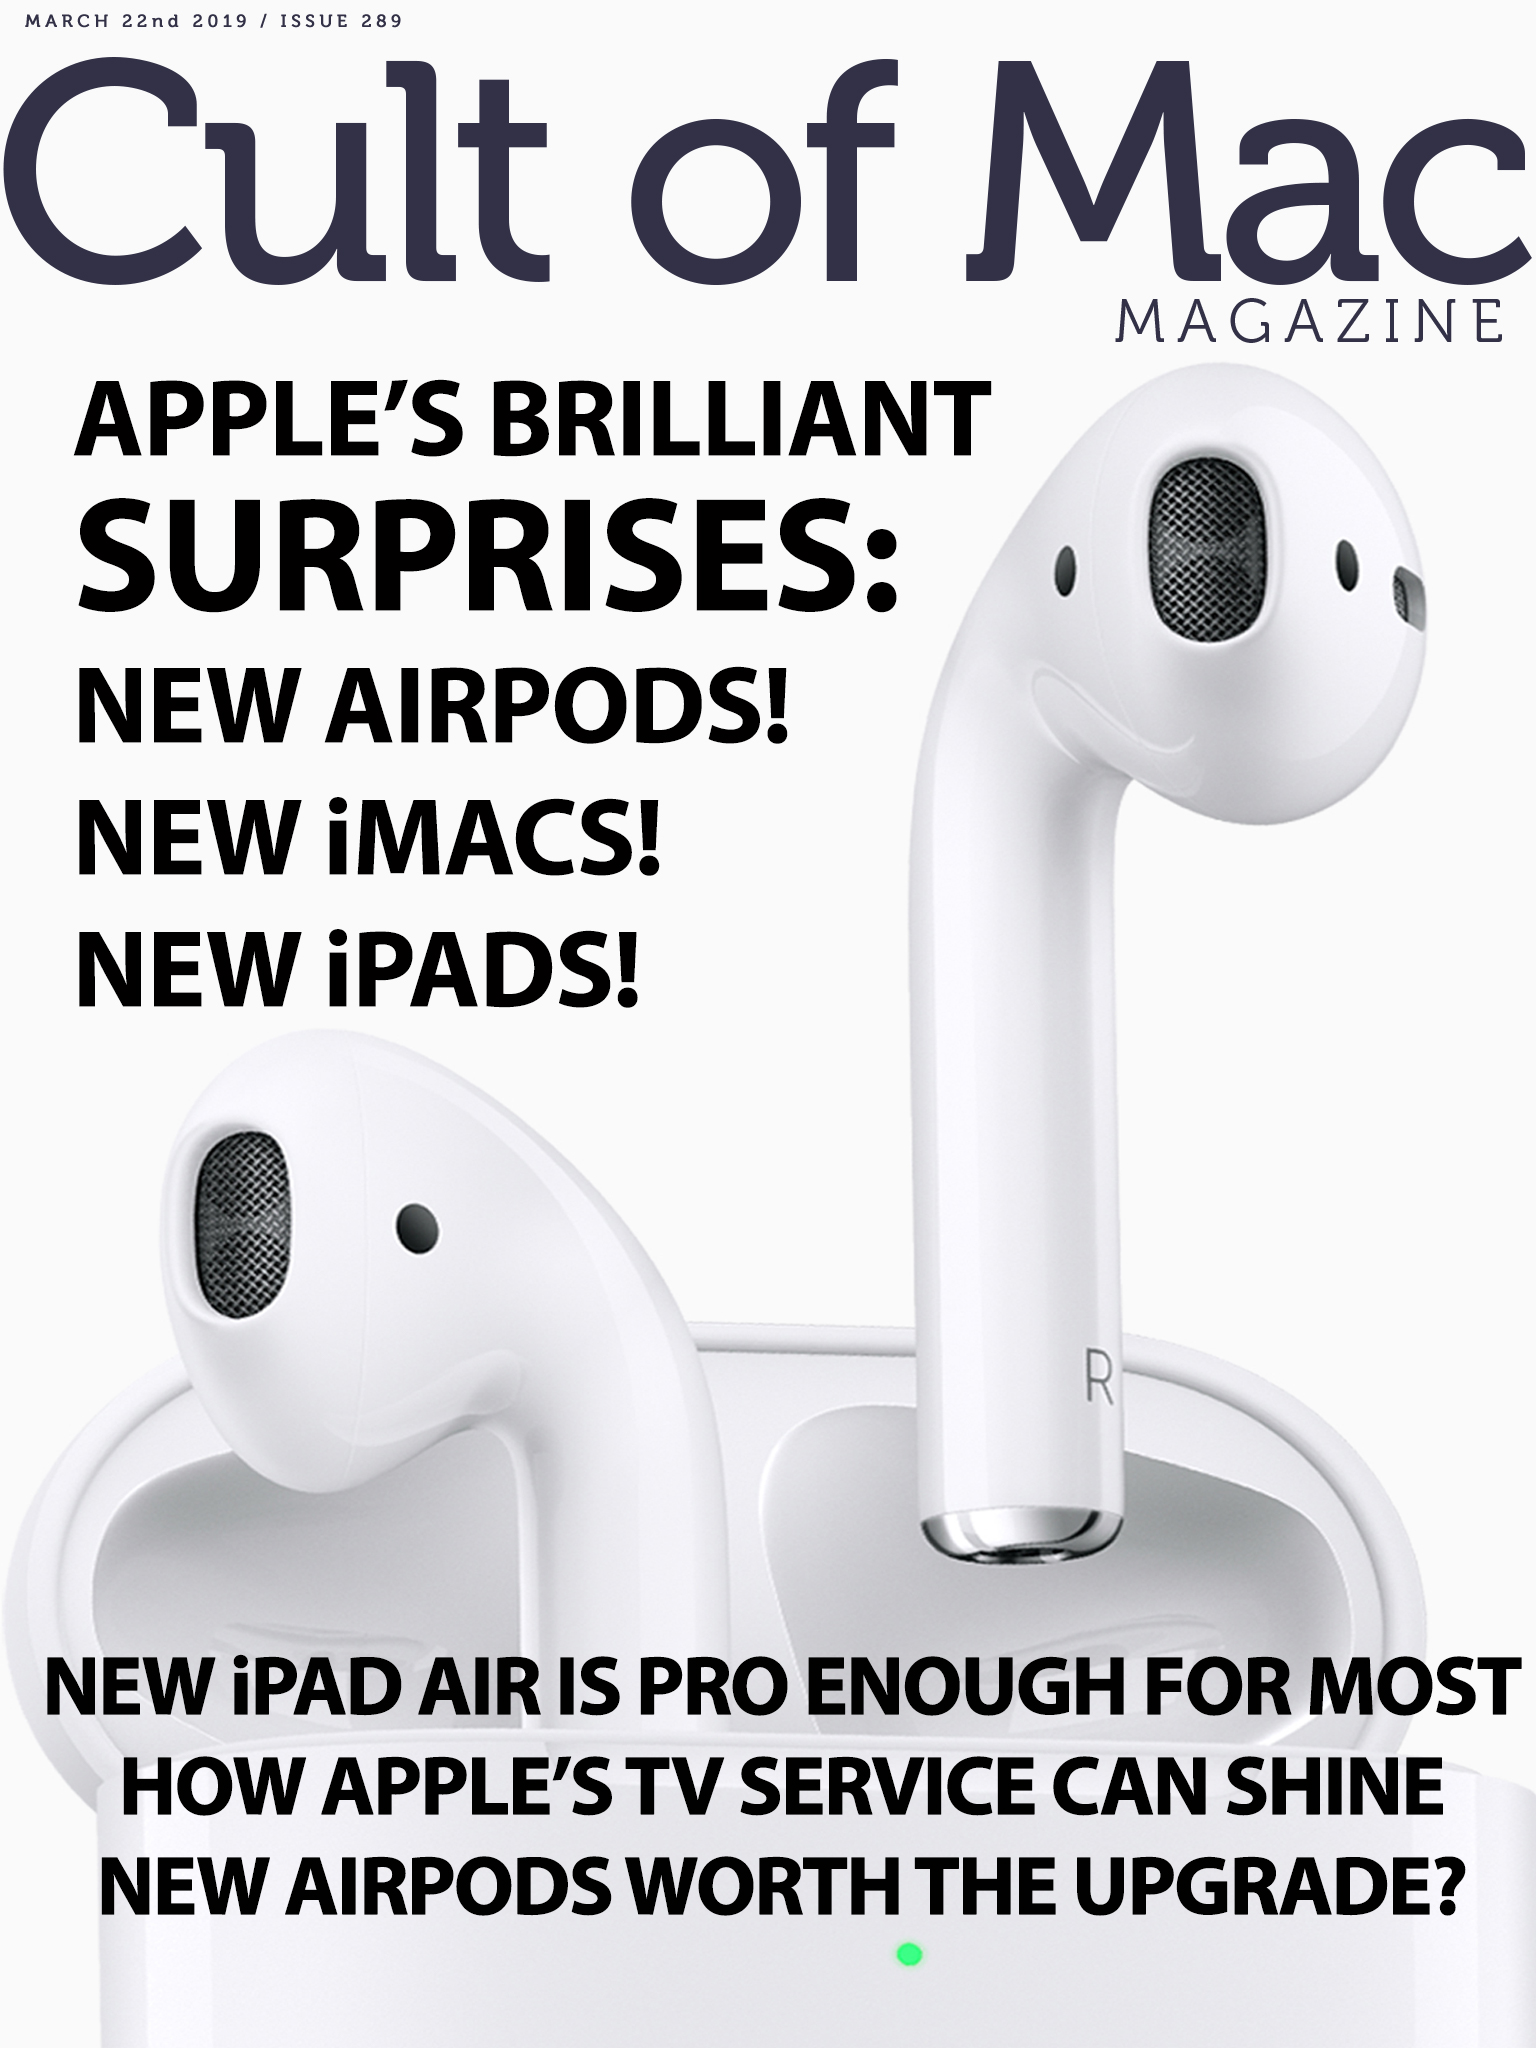 Apple's PR blitz for new AirPods, iPads and iMacs was more than just surprising - it was brilliant!